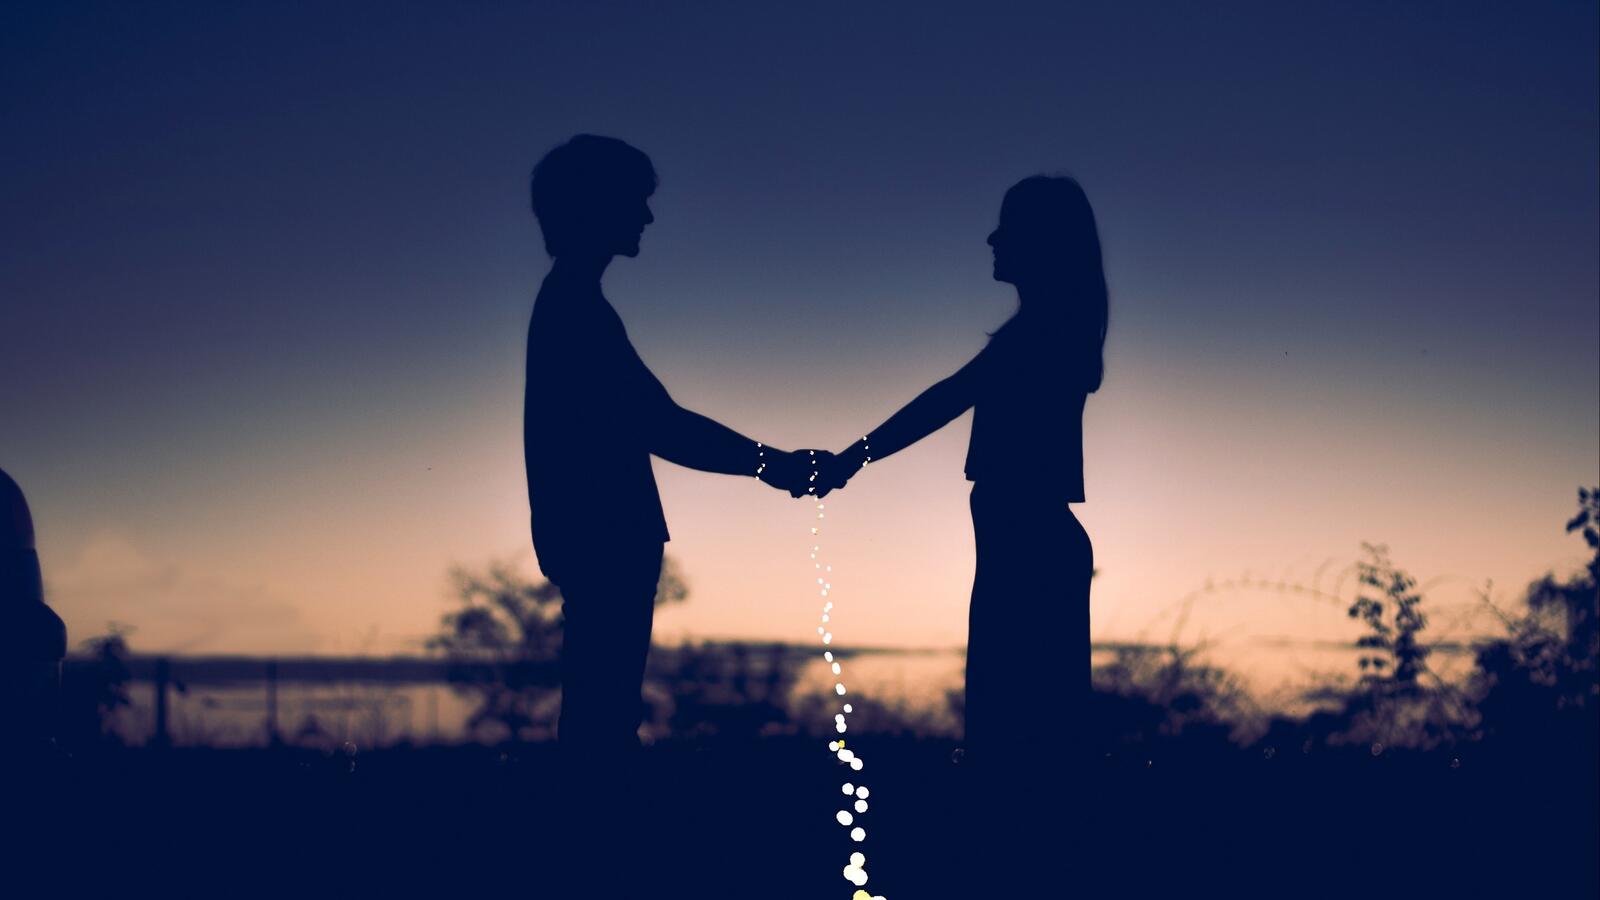 Wallpapers light picturesque wallpaper couple silhouette on the desktop